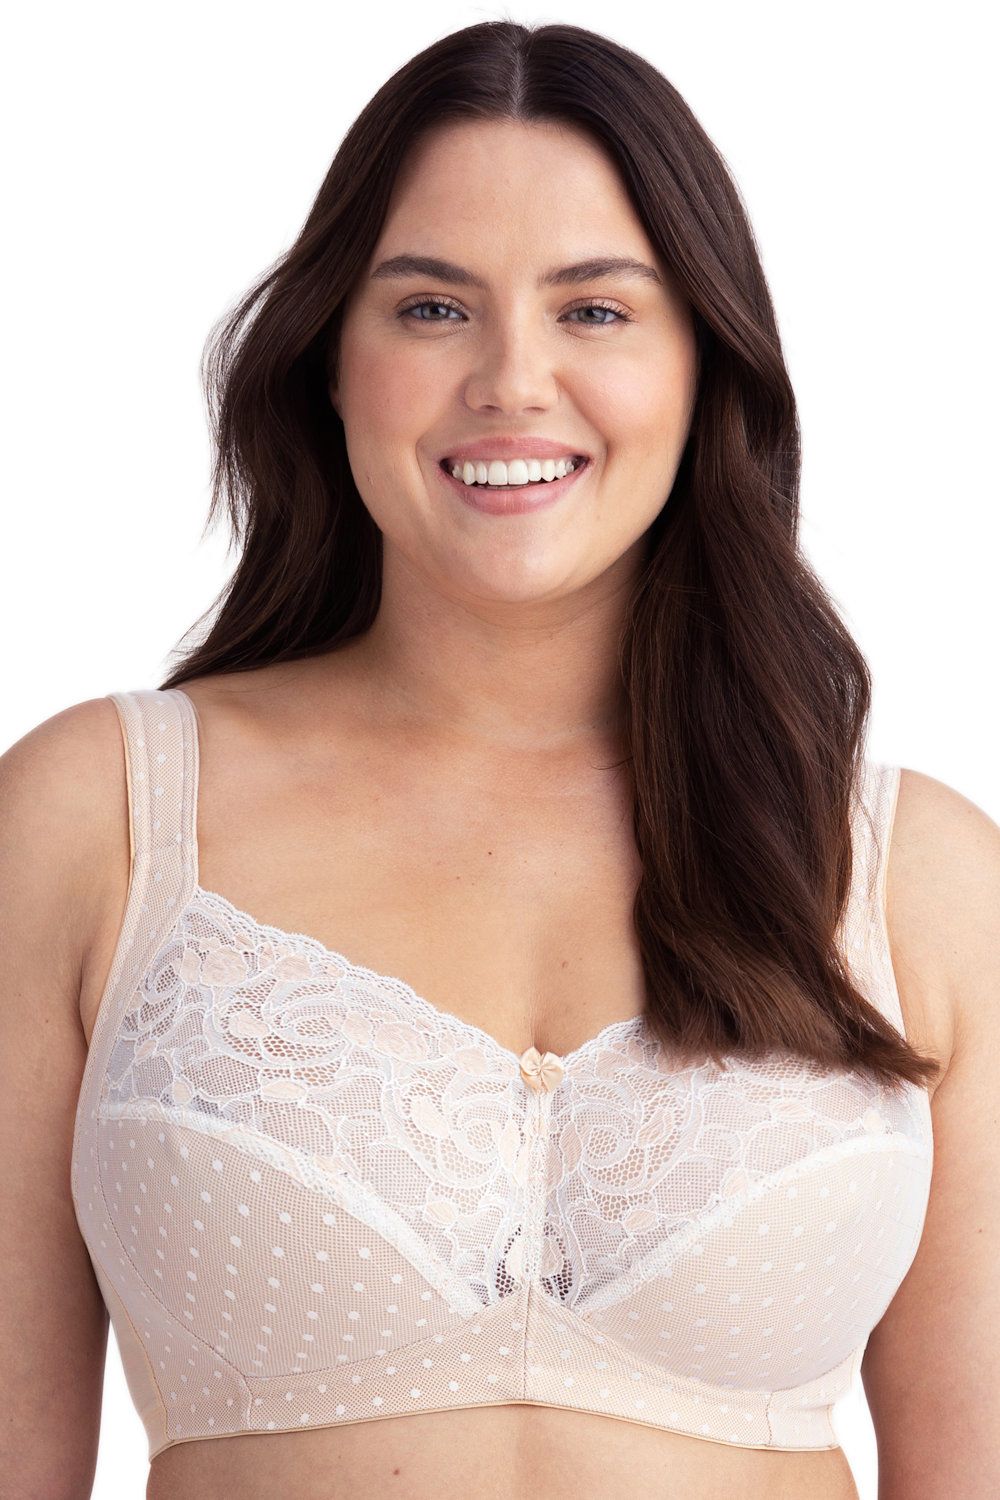 Plain Non Padded Hosiery Bra, Size: 26 To 38 at best price in New